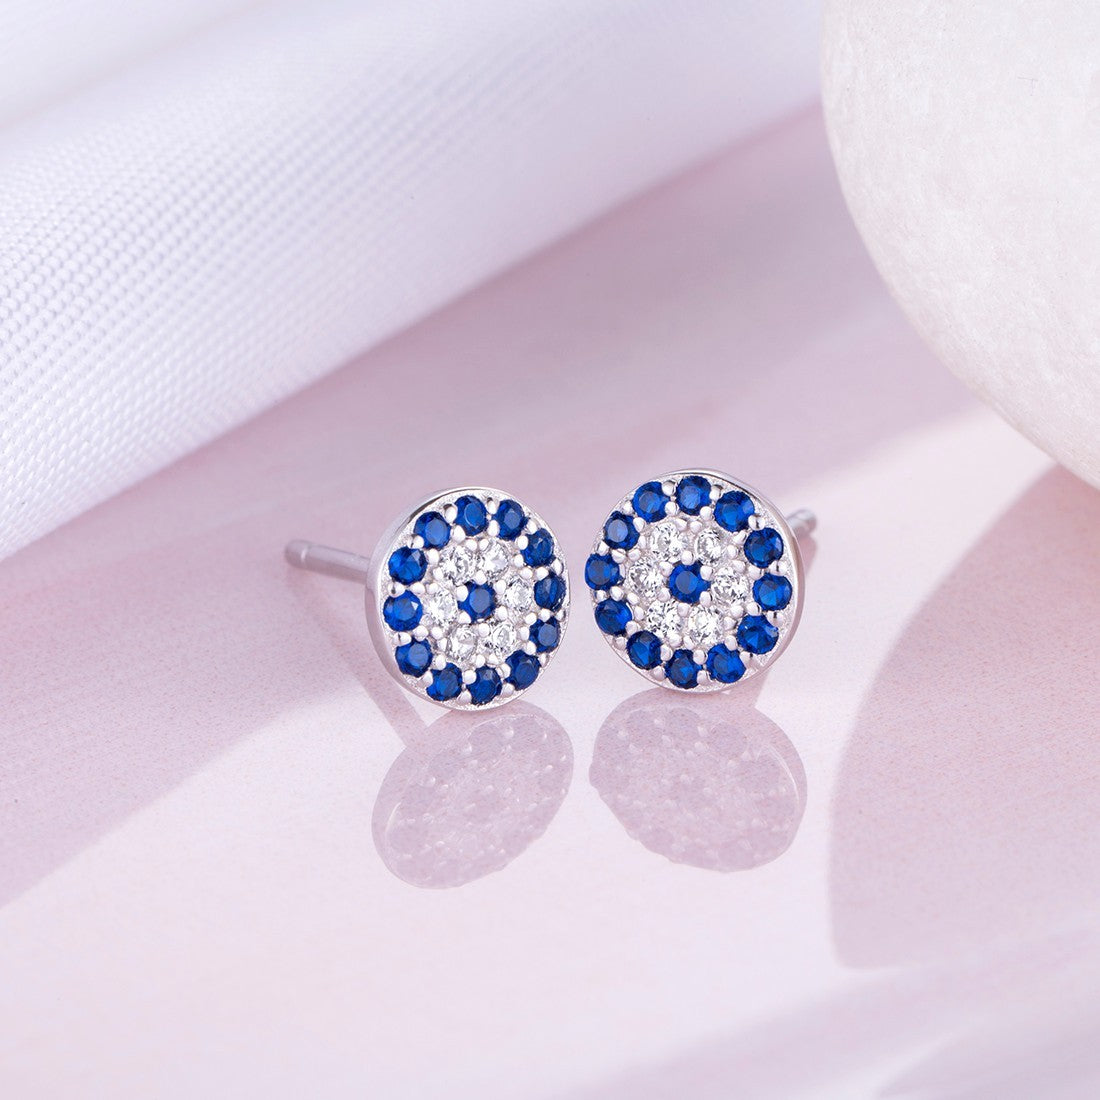 Blue-CZ Studded Rhodium Plated 925 Sterling Silver Earrings